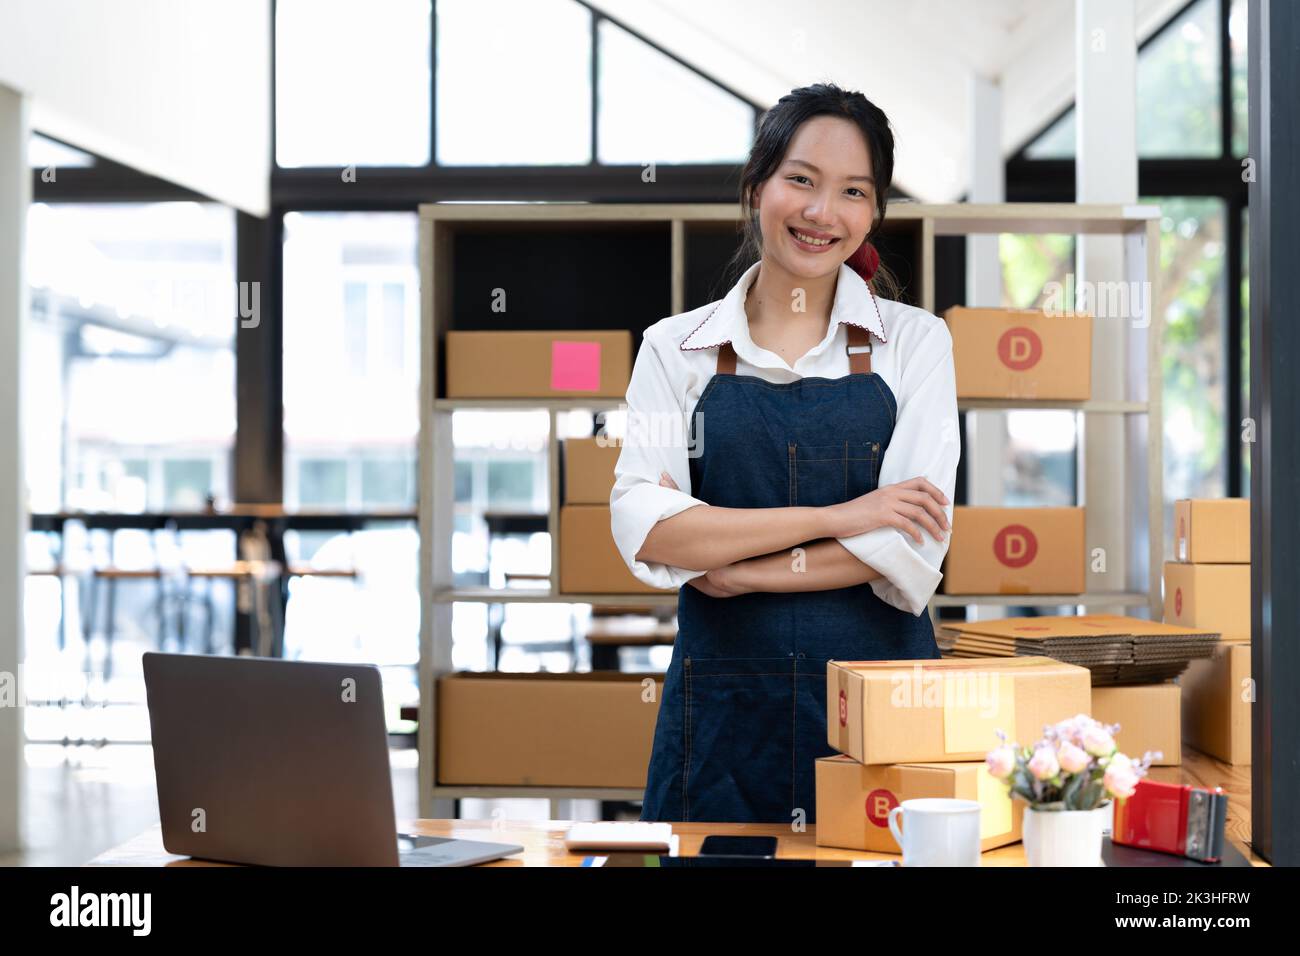 businesswoman start small business and successful SME entrepreneurs A woman works from home delivering parcels online. SME delivery concept and Stock Photo